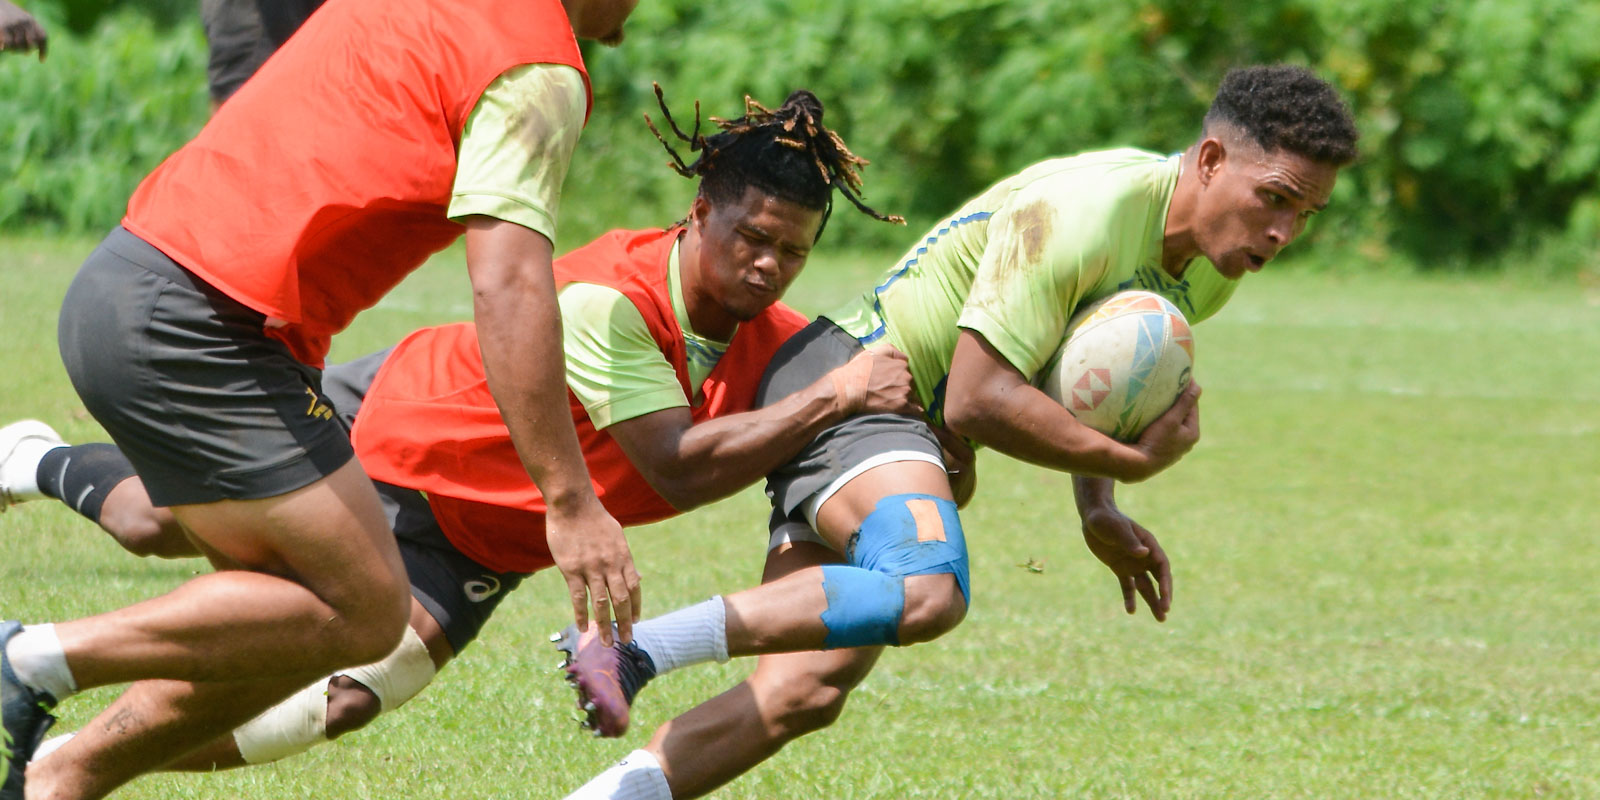 Ronald Brown tackled by Dewald Human during training.